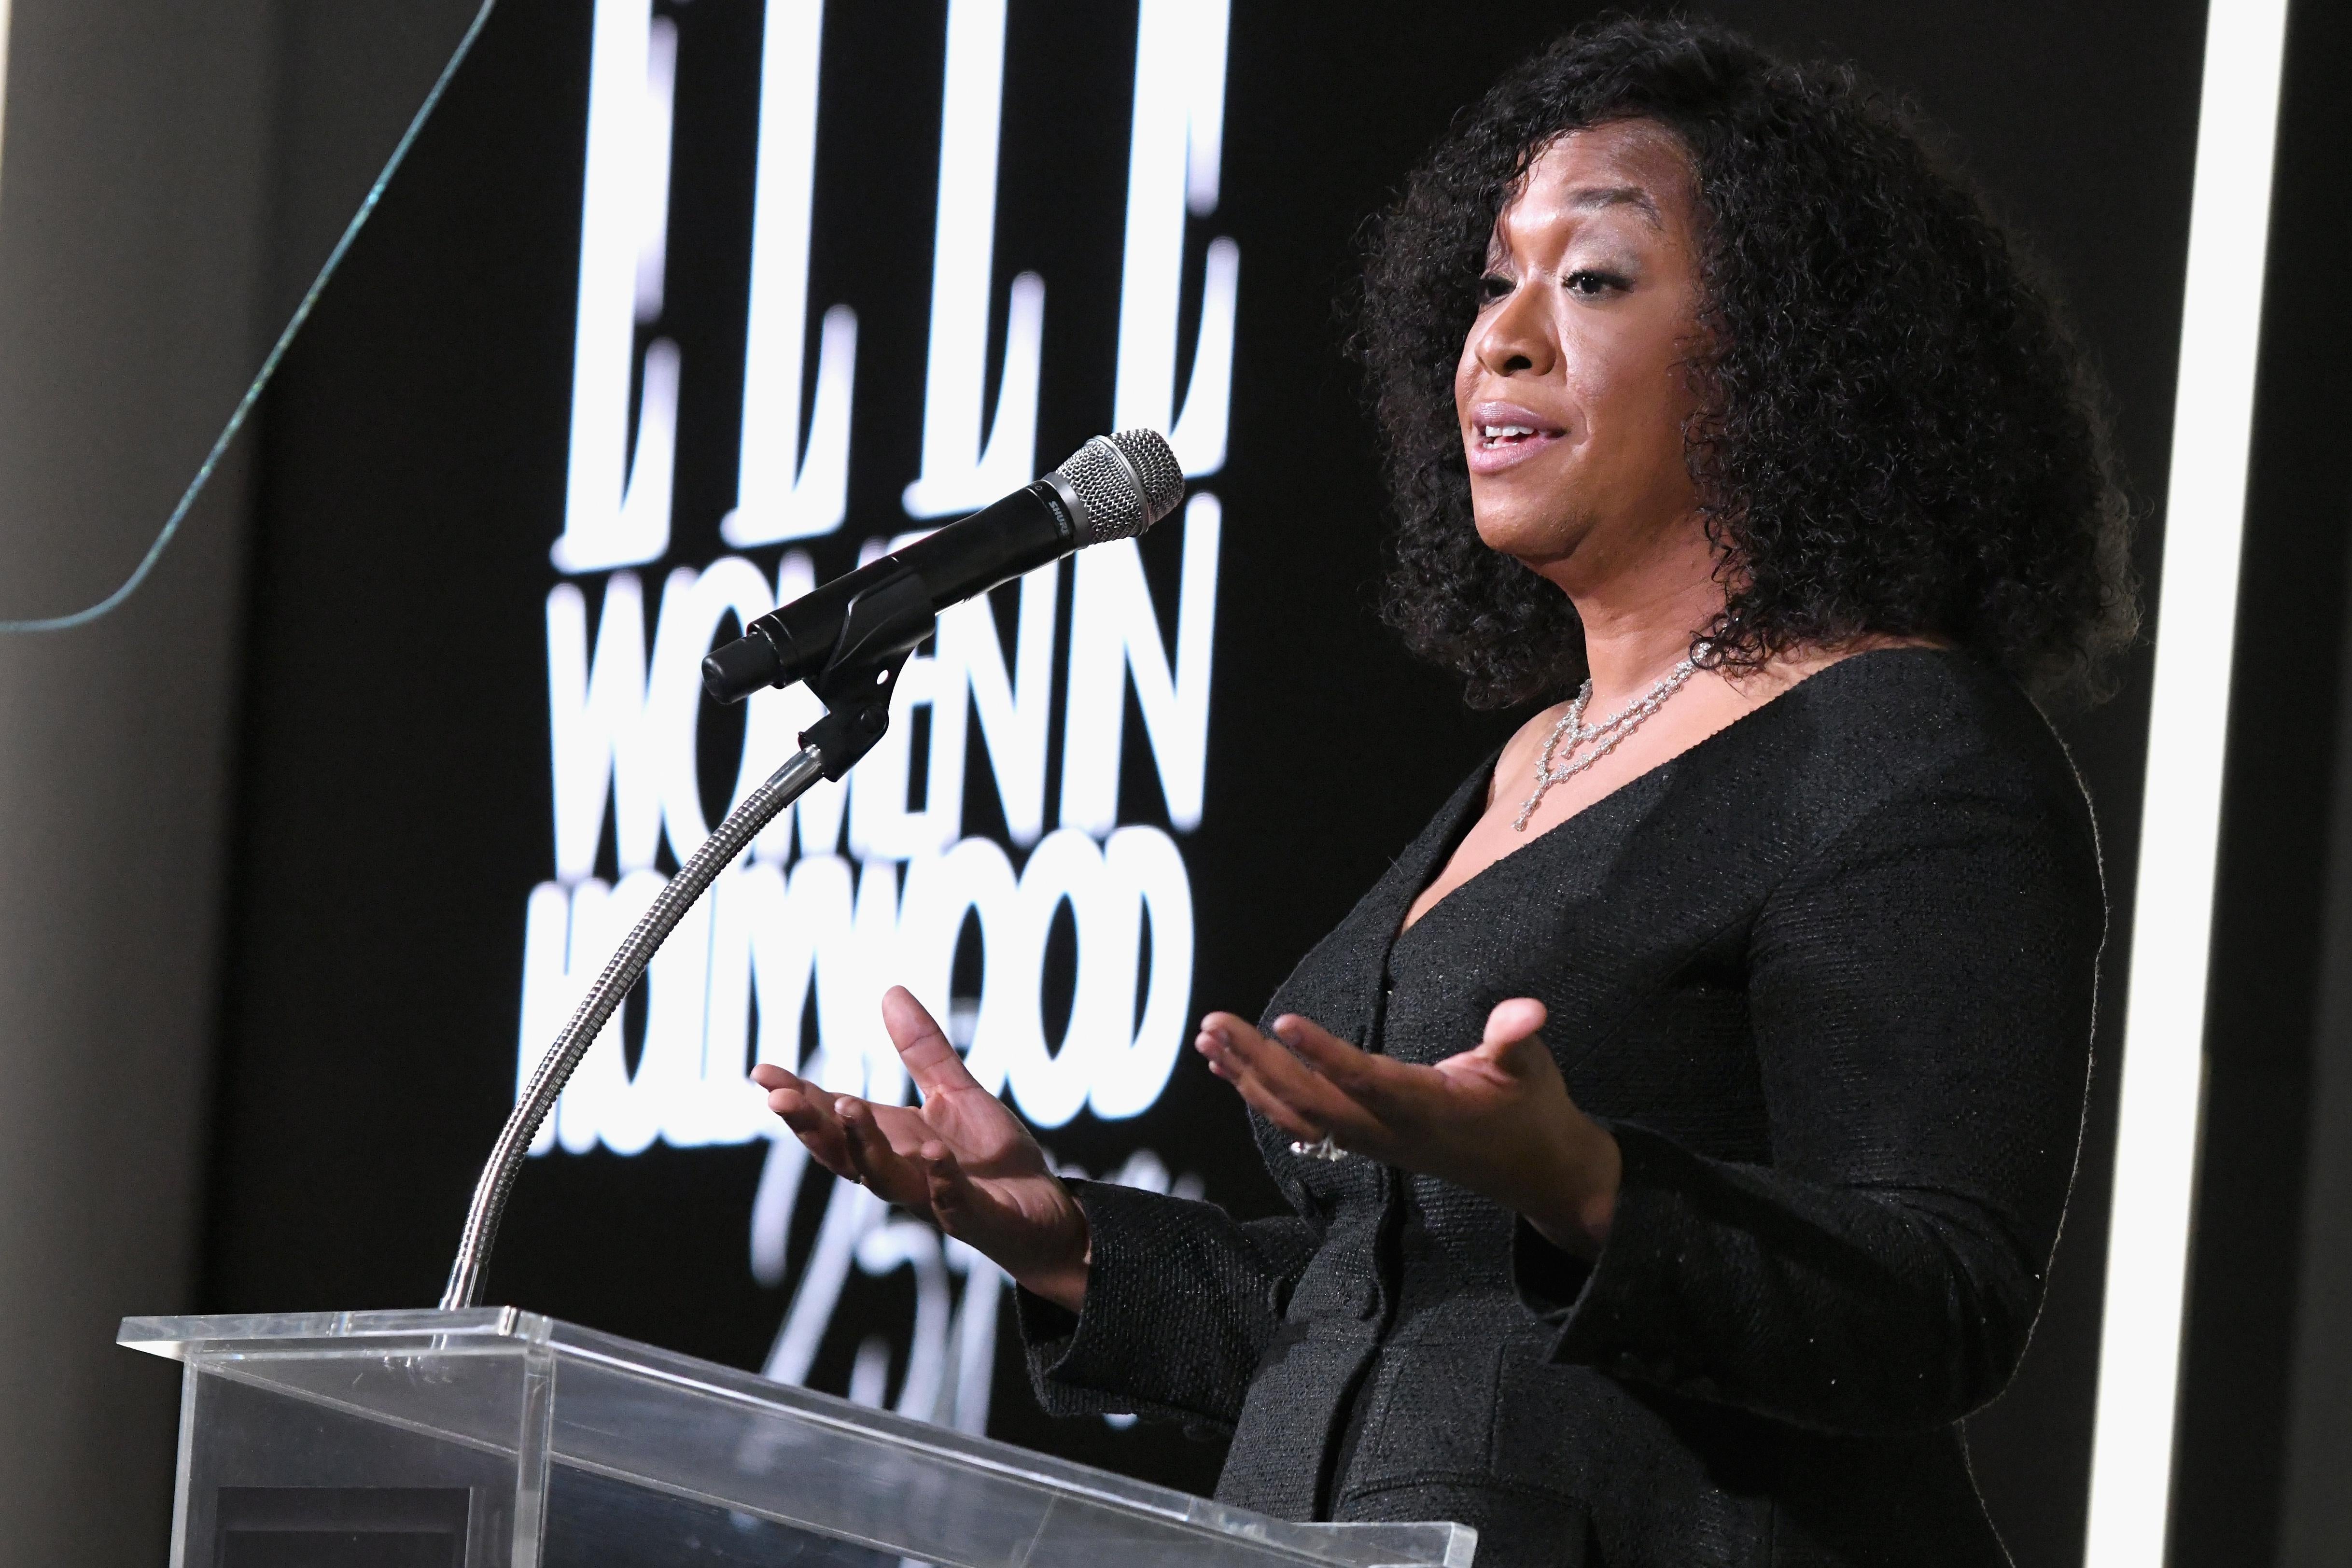 Shonda Rhimes stands at a glass podium, arms outstretched.